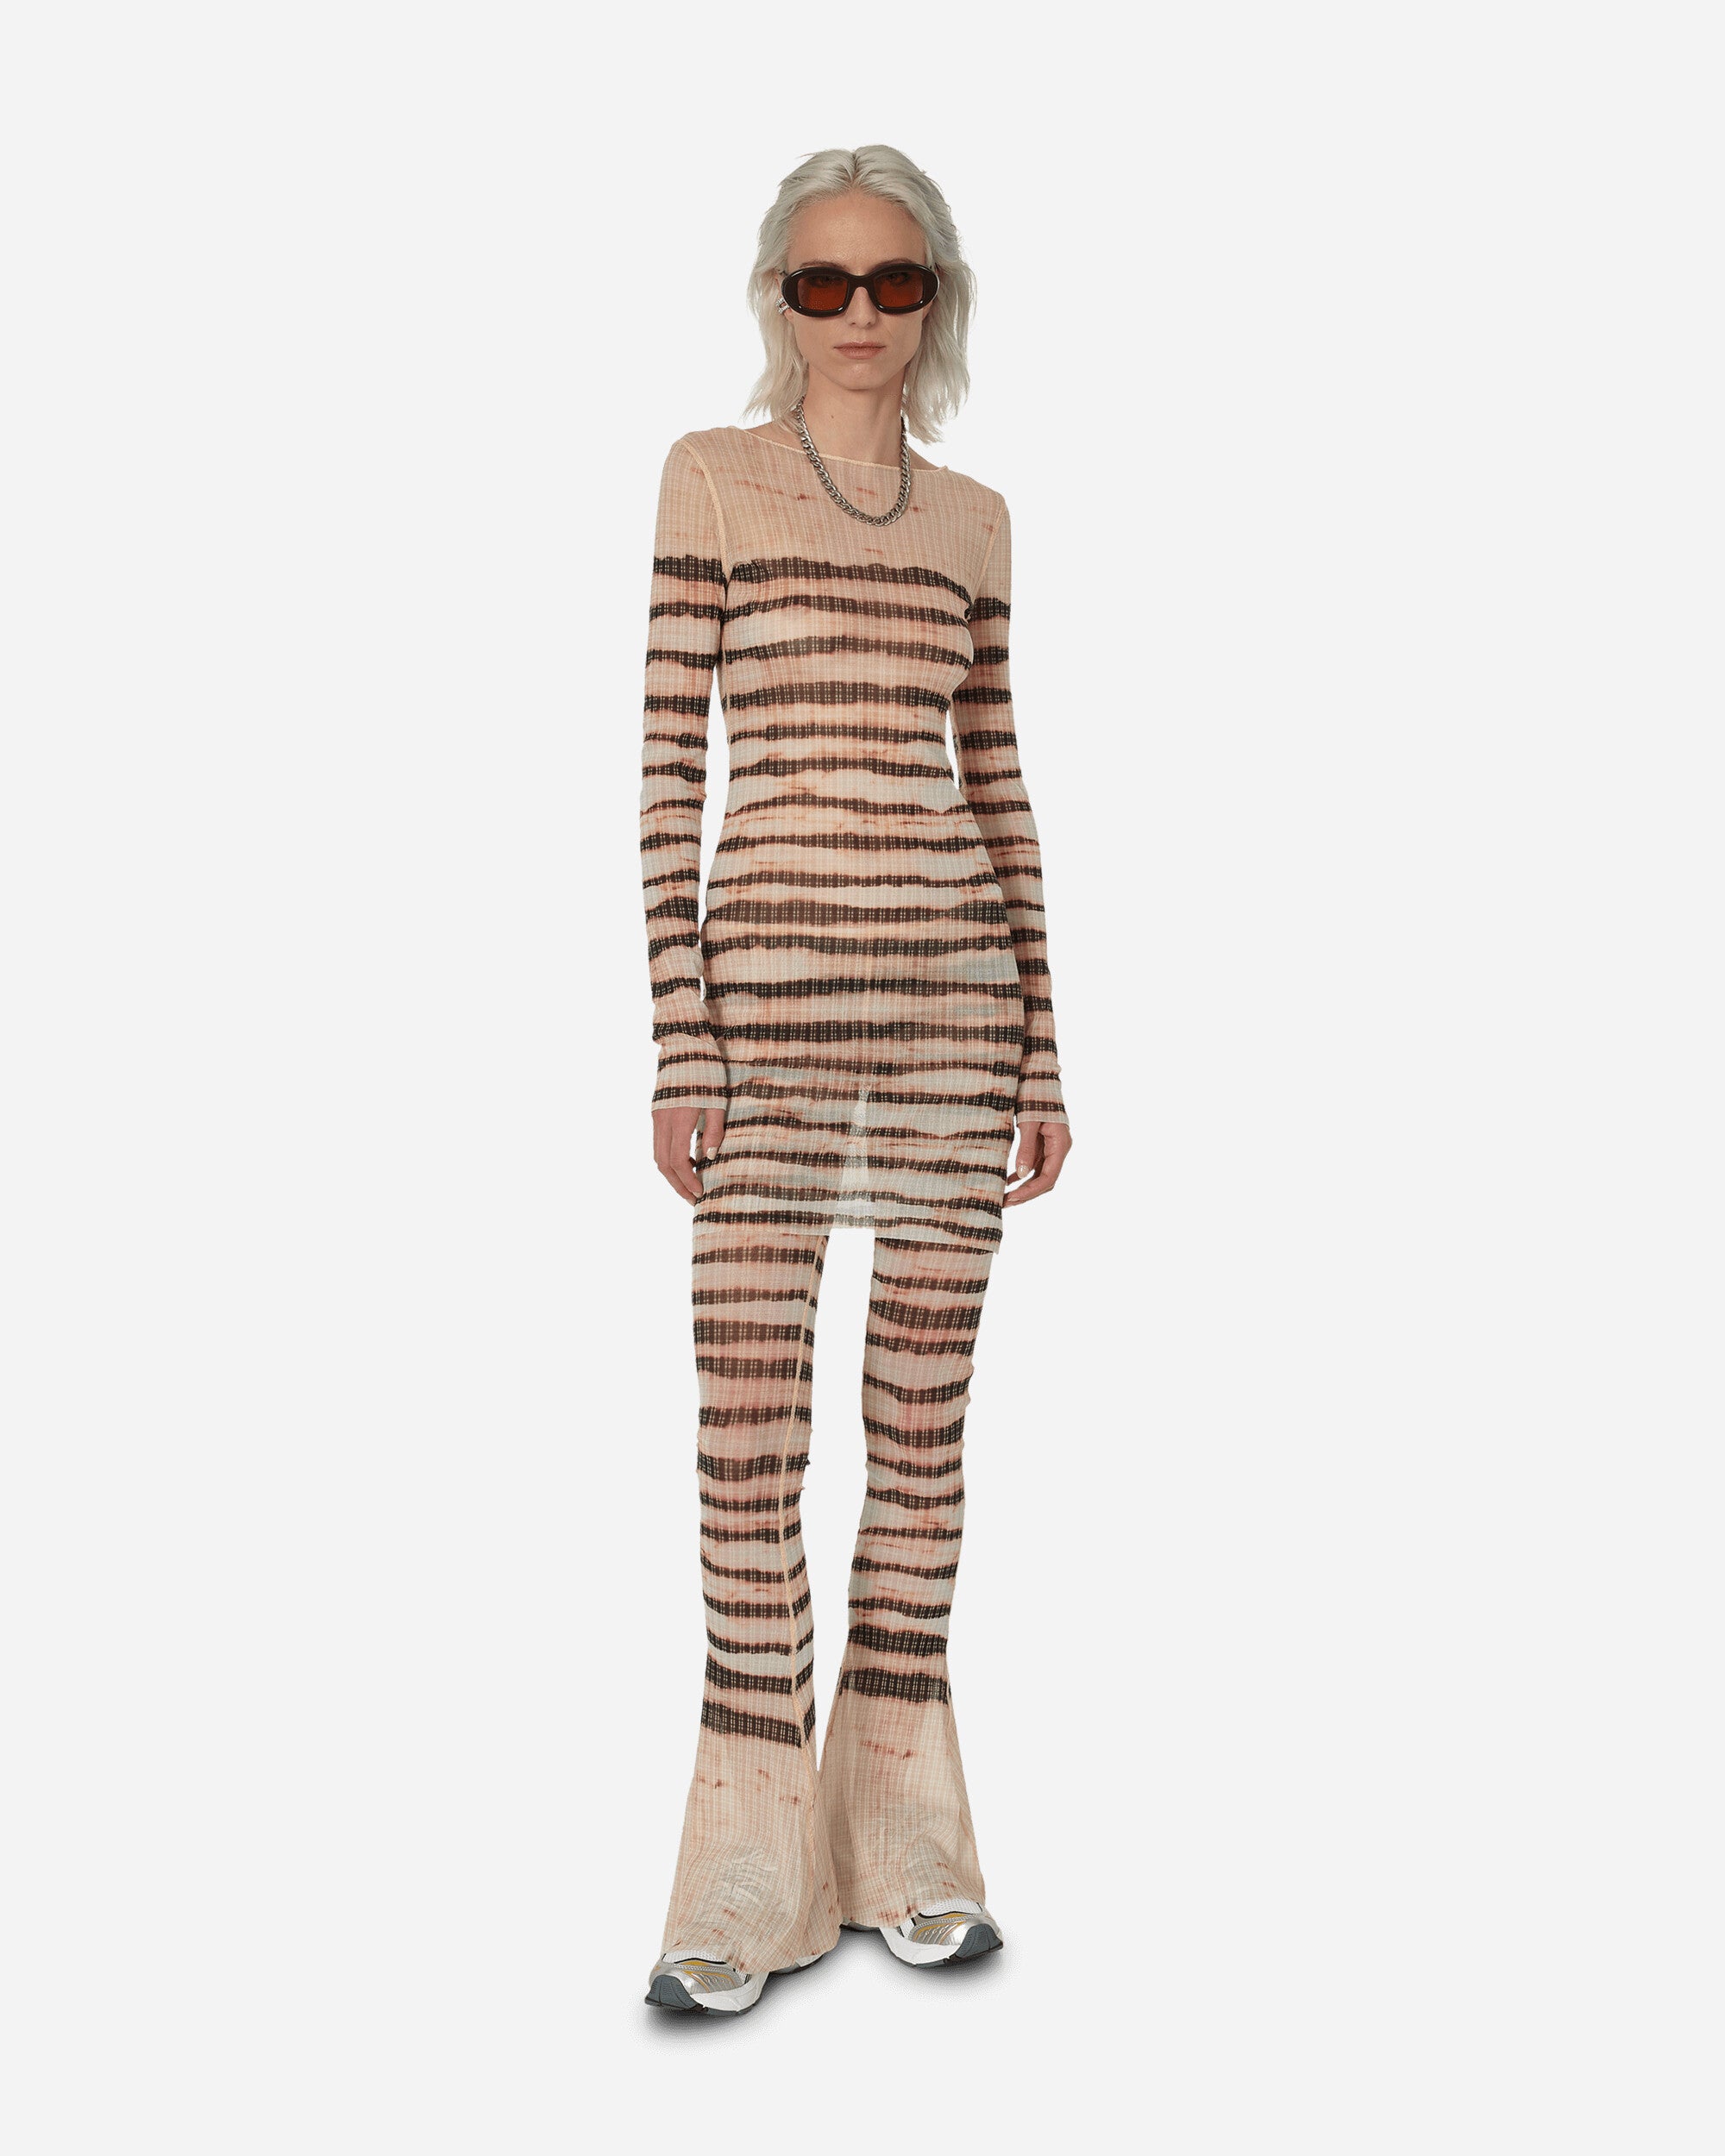 Jean Paul Gaultier Wmns Knwls High Neck Dress Long Sleeves Printed Striped Washed Mariniere Ecru/Brown Dresses Dress Short 2314-F-RO064-T535 360